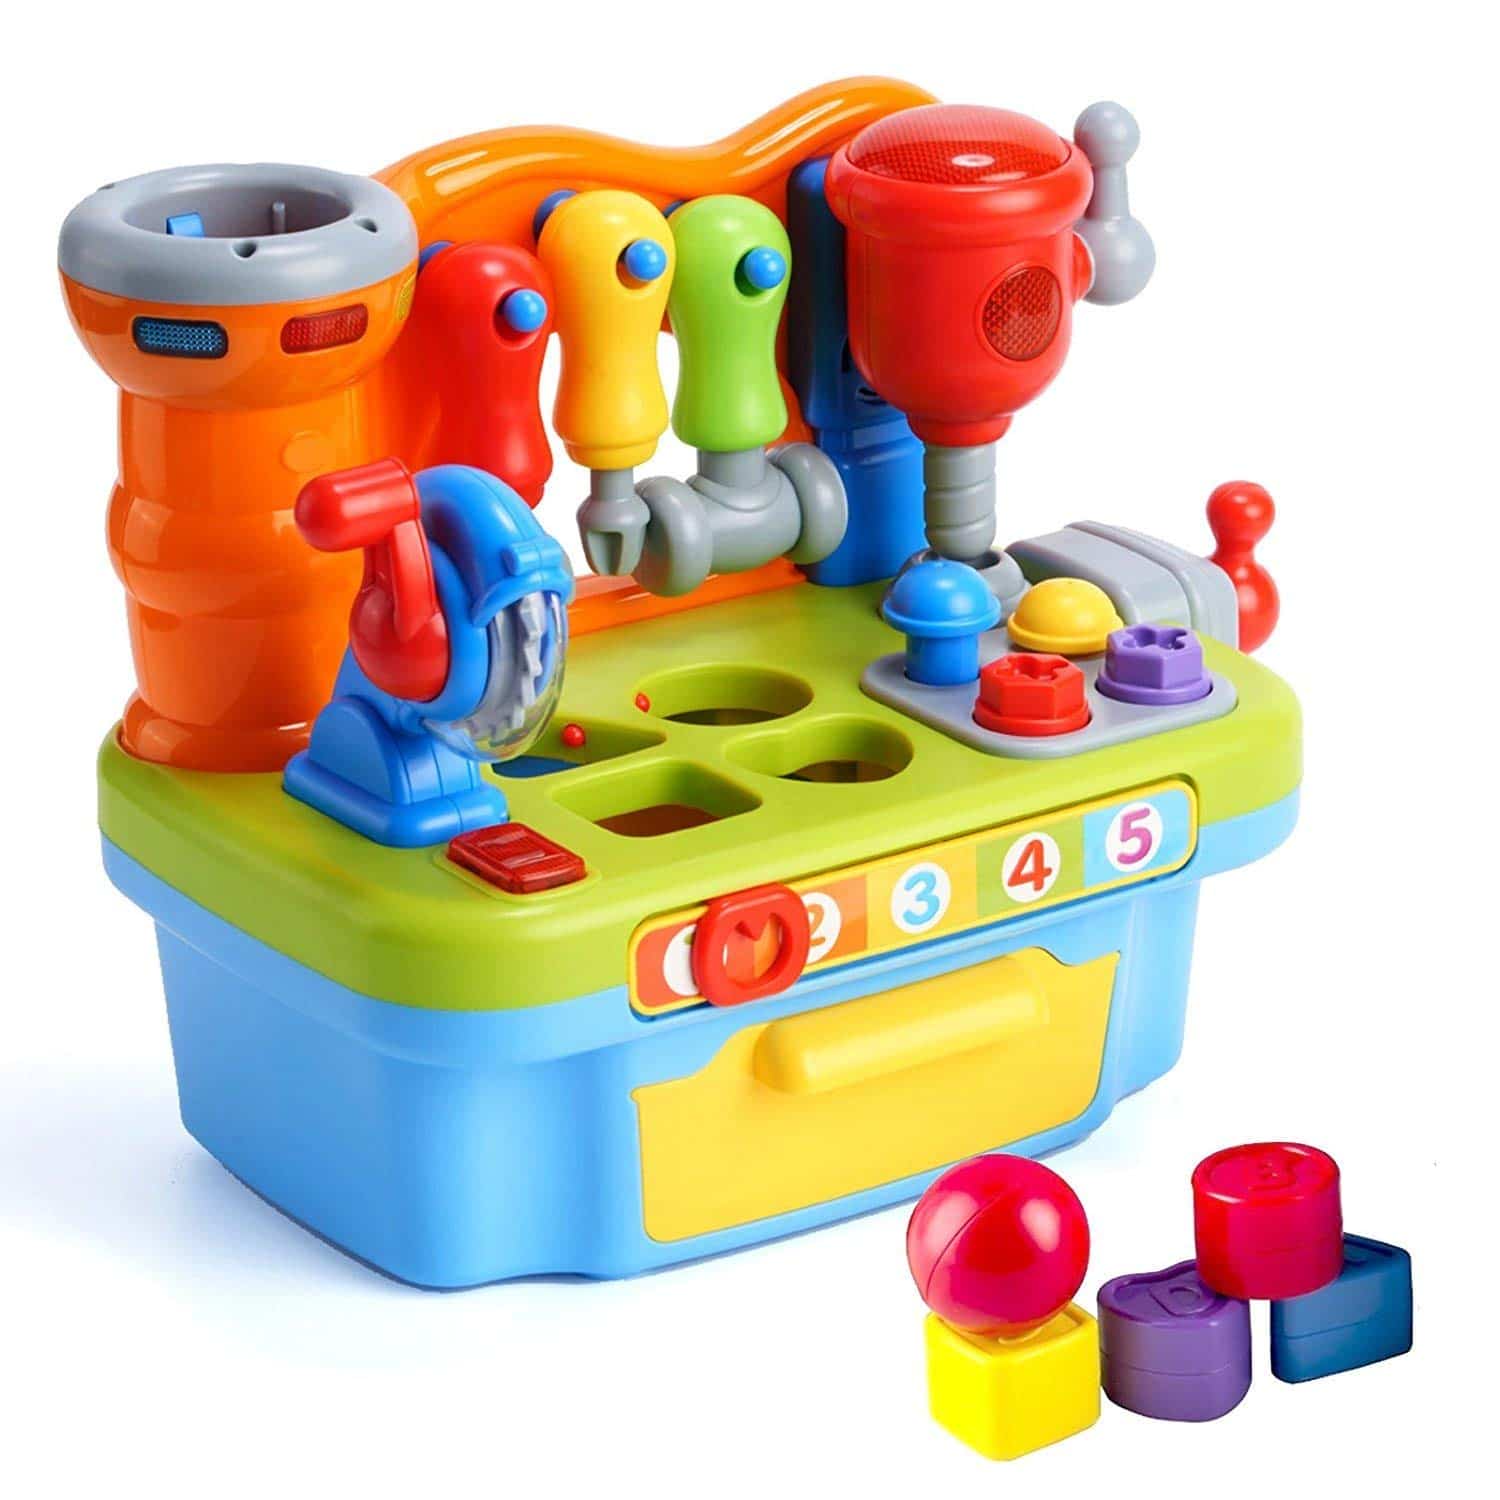 Woby Multifunctional Musical Learning Tool Workbench